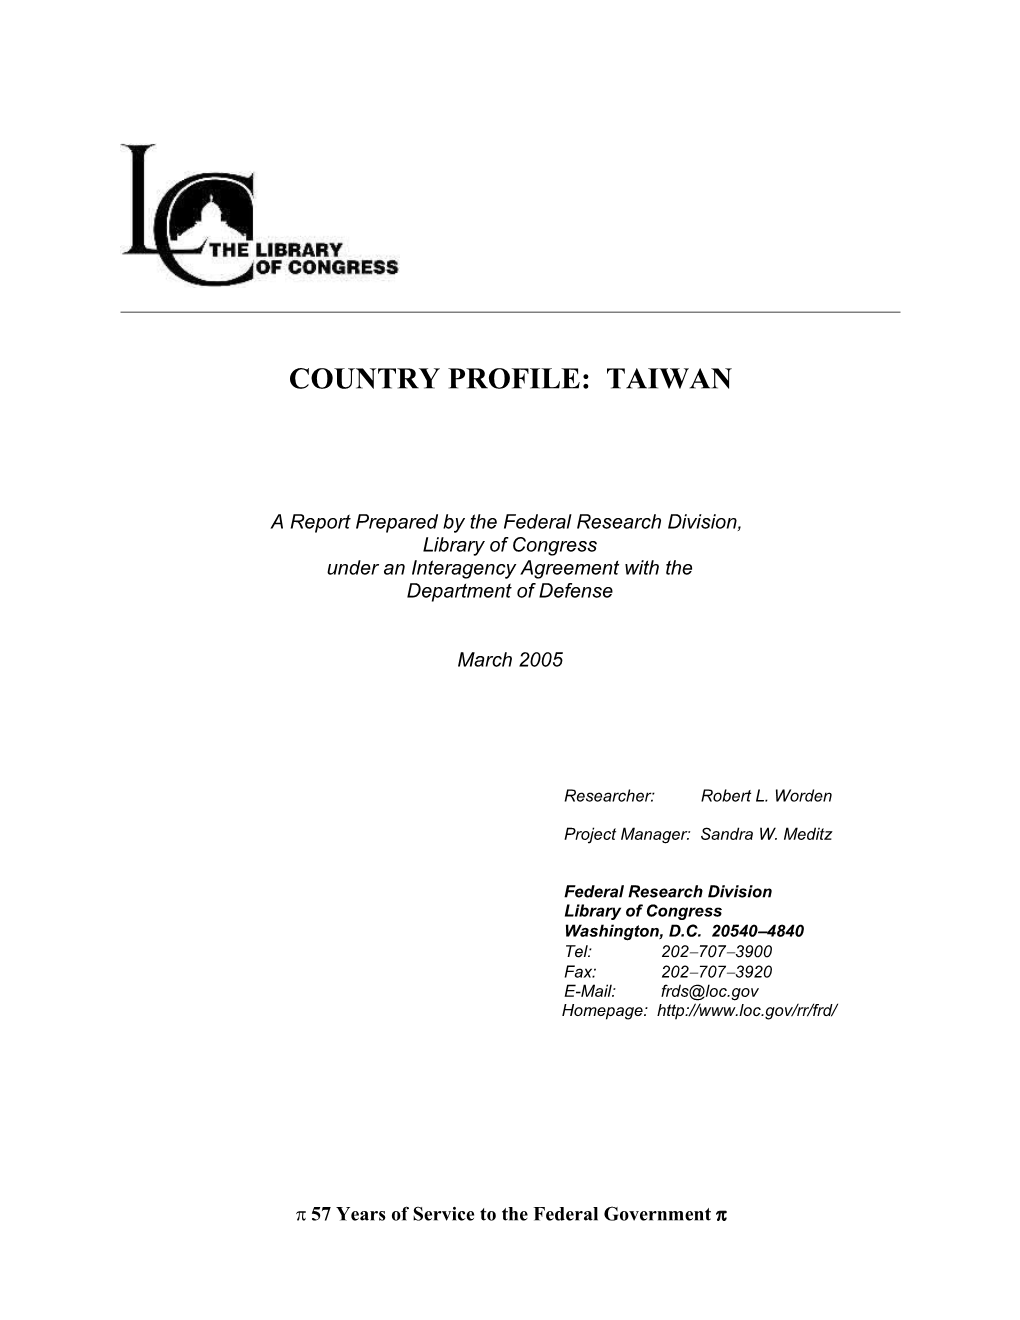 Library of Congress Federal Research Division Country Profile: Saudi Arabia, March 2005